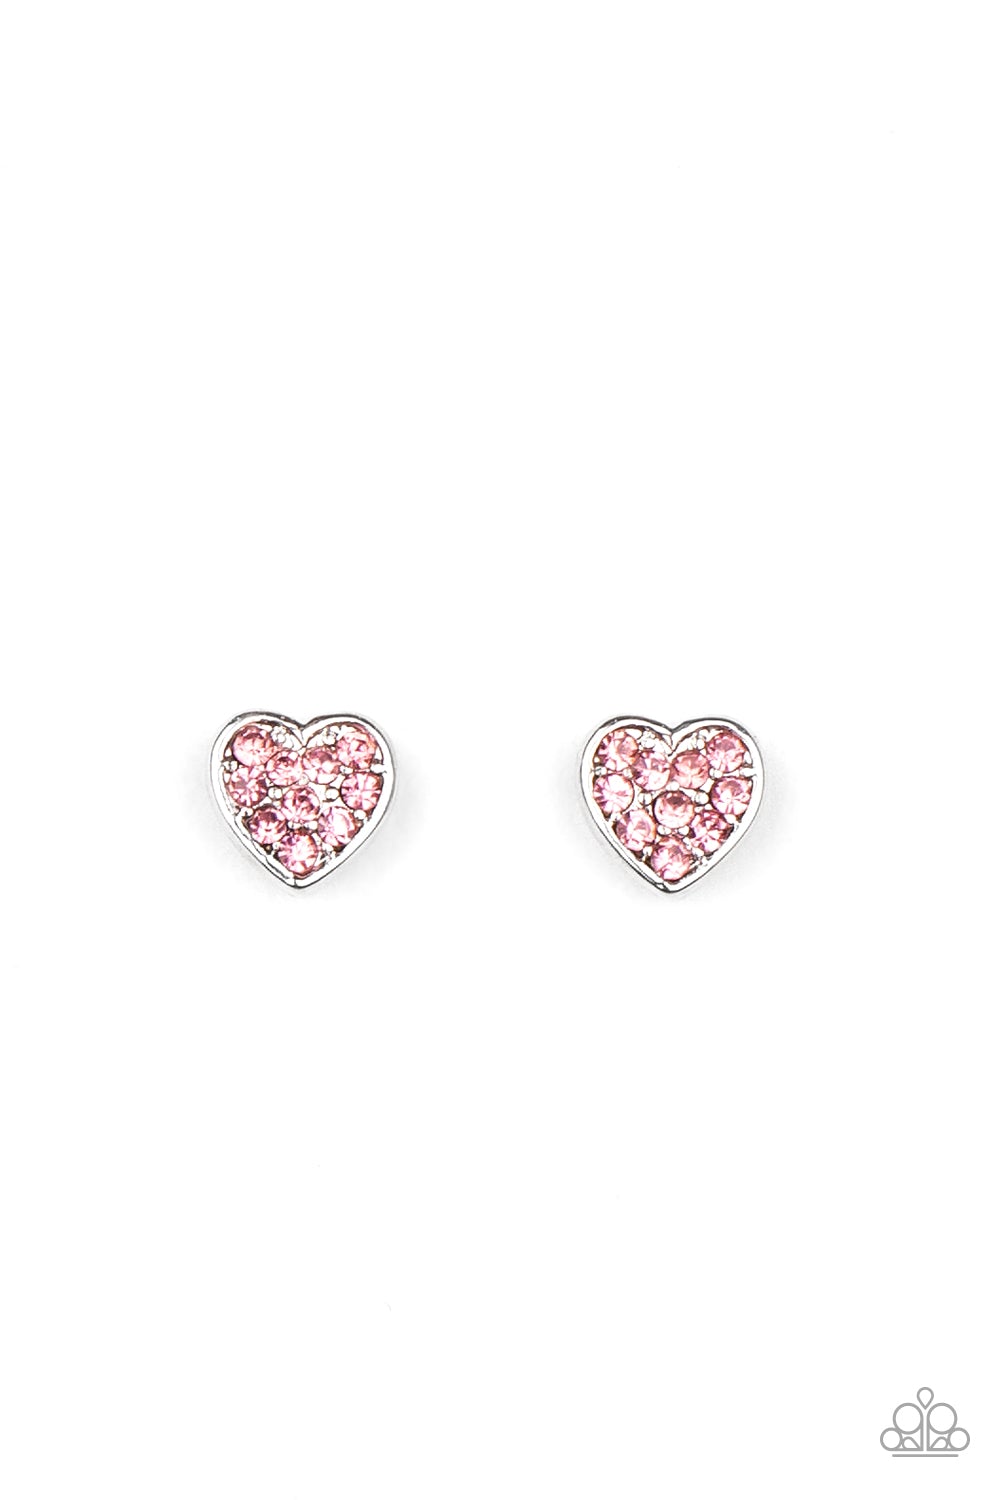 Paparazzi Accessories -  glittery pink rhinestones, the dainty frames include a variety of bar, round, bow, floral, heart, and butterfly shapes #SS15 - Starlet Shimmer Earrings